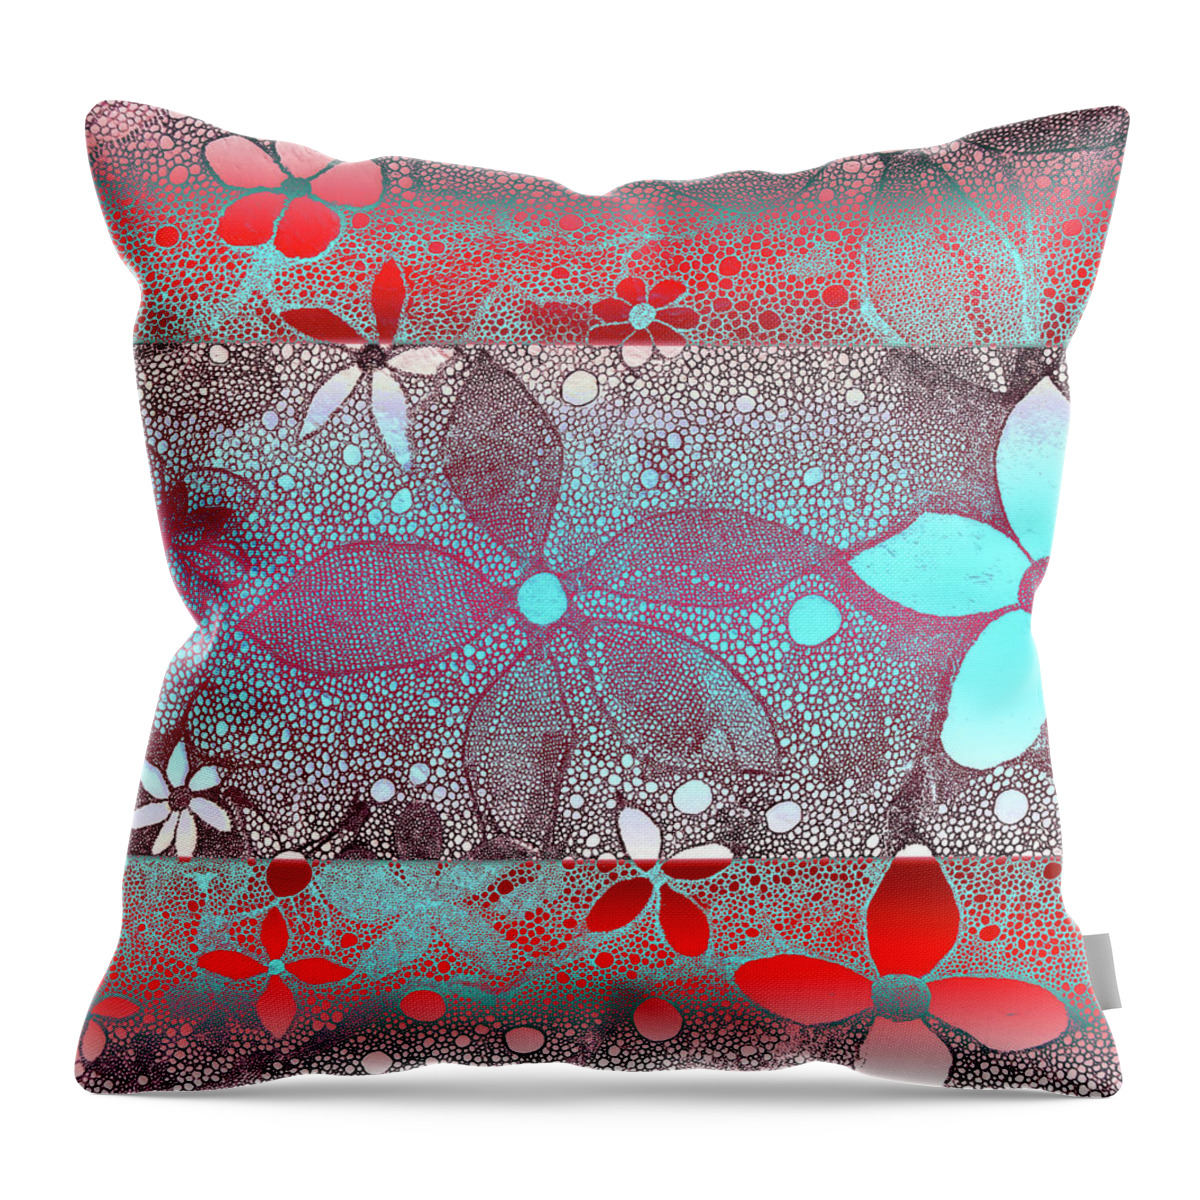 Red Throw Pillow featuring the mixed media Red Blue Flowers In Lace by Melinda Firestone-White